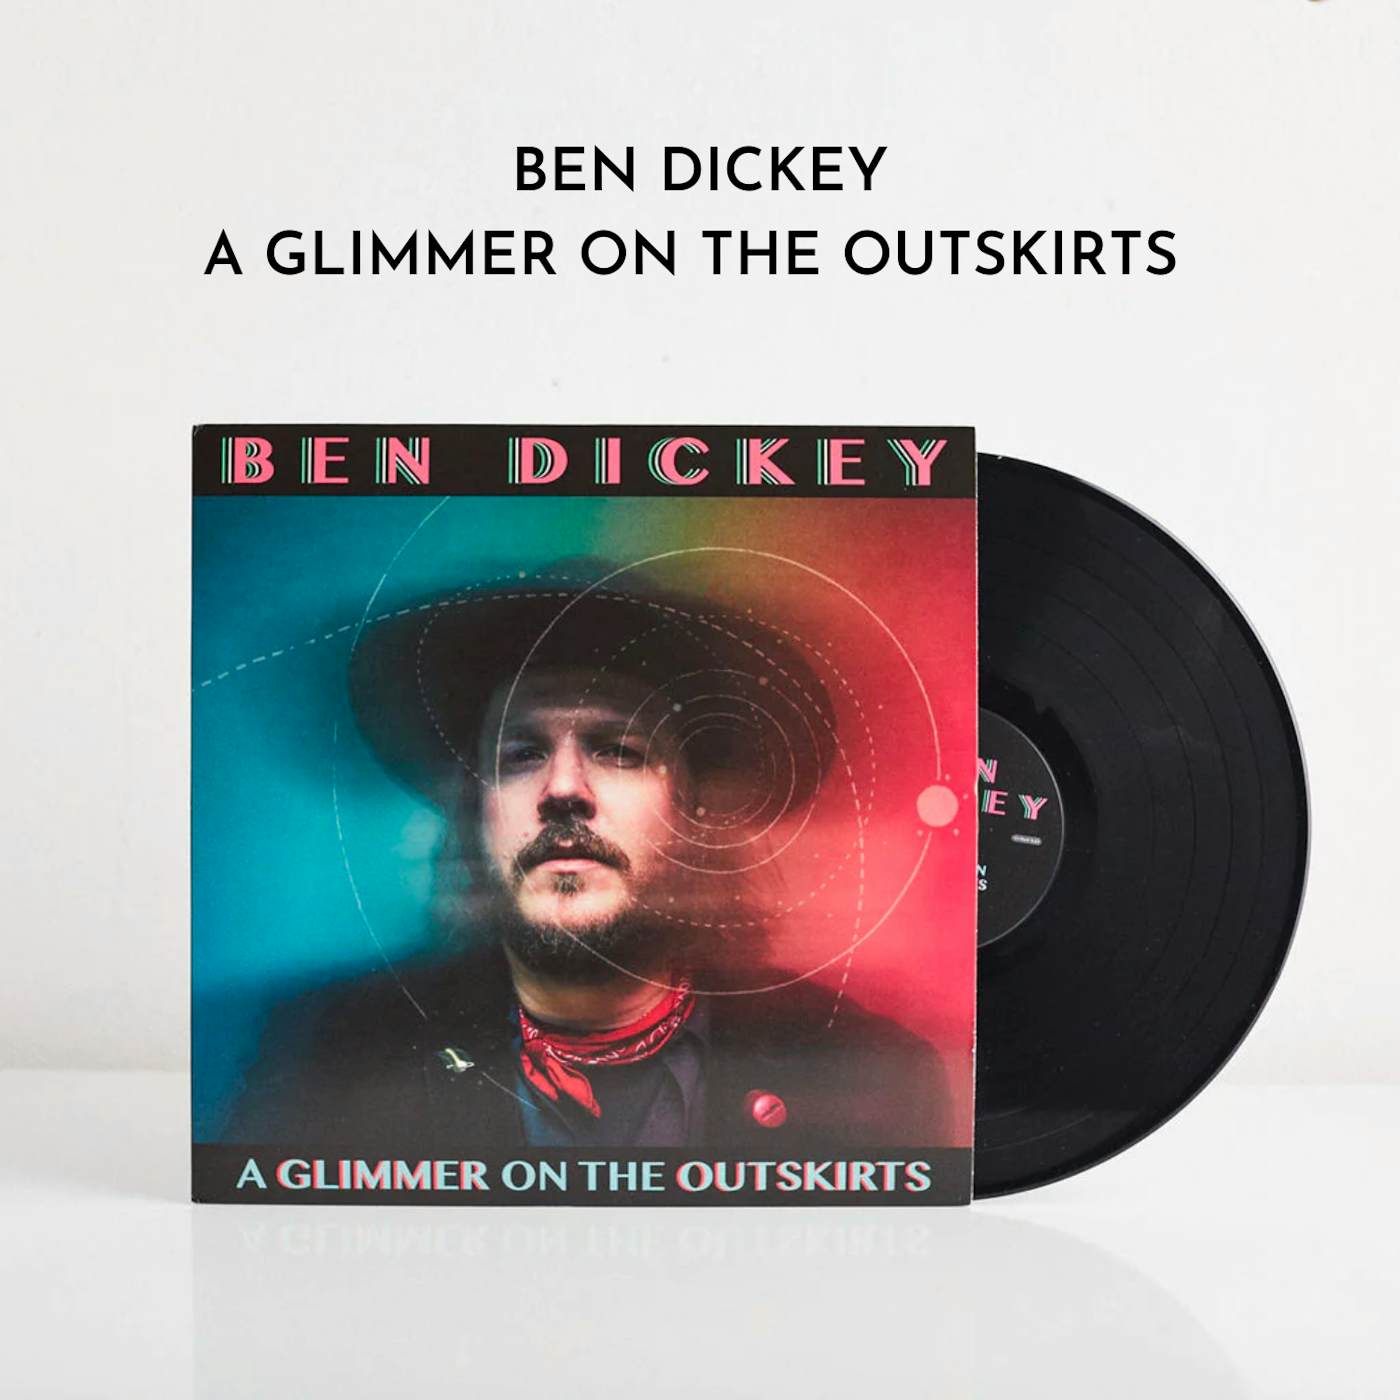 Ben Dickey A Glimmer on the Outskirts (LP) (Vinyl)